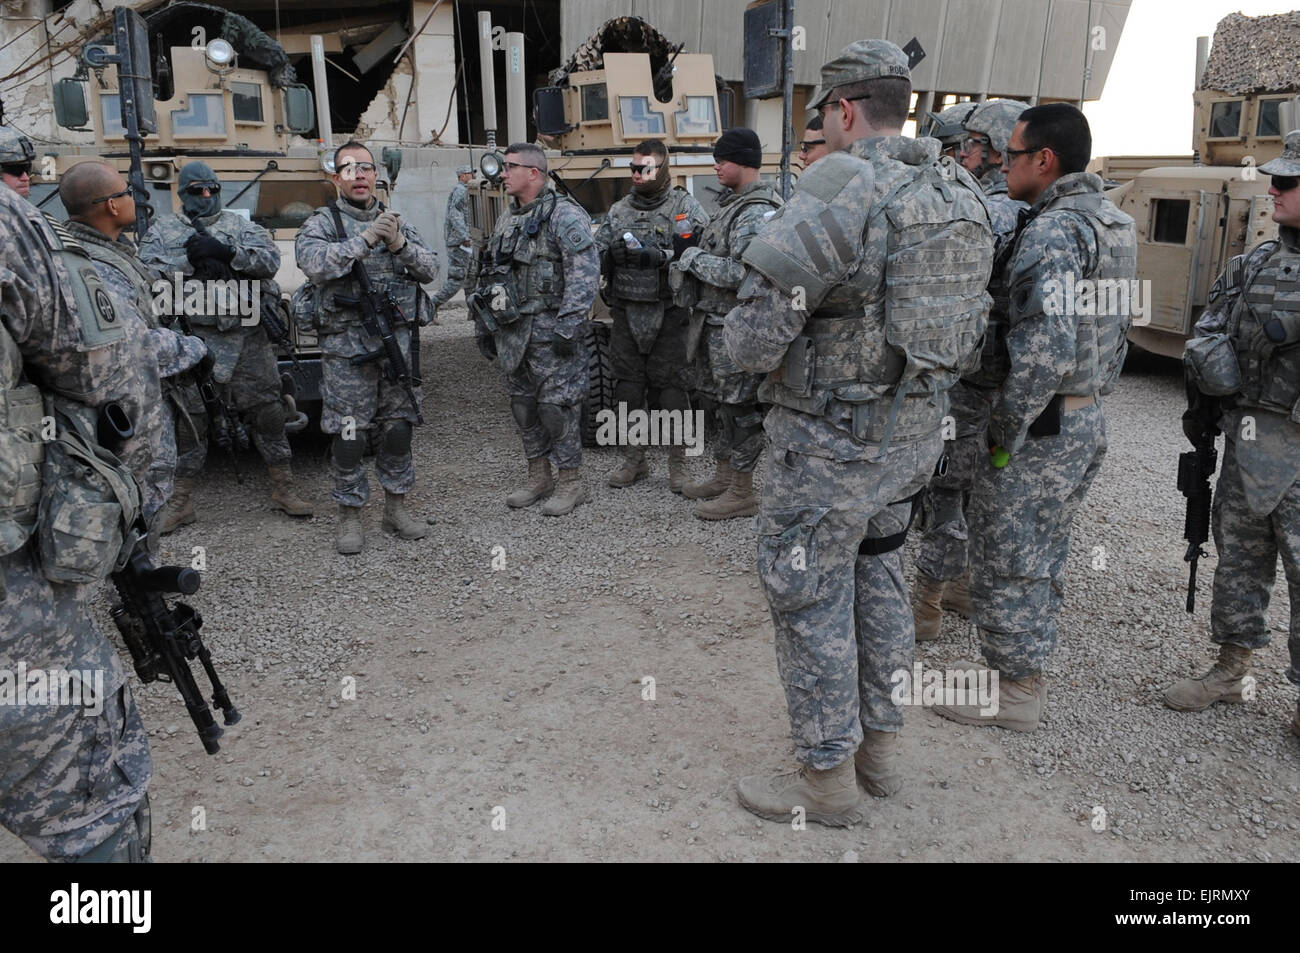 U.S. Soldiers of B Troop, 5th Cavalry, 73rd Regiment, 3rd Brigade Combat Team, 82nd Airborne Division, receive a convoy briefing on Forward Operating Base Loyalty, Beladiyat, eastern Baghdad, Iraq, on Jan. 2, 2009. Stock Photo